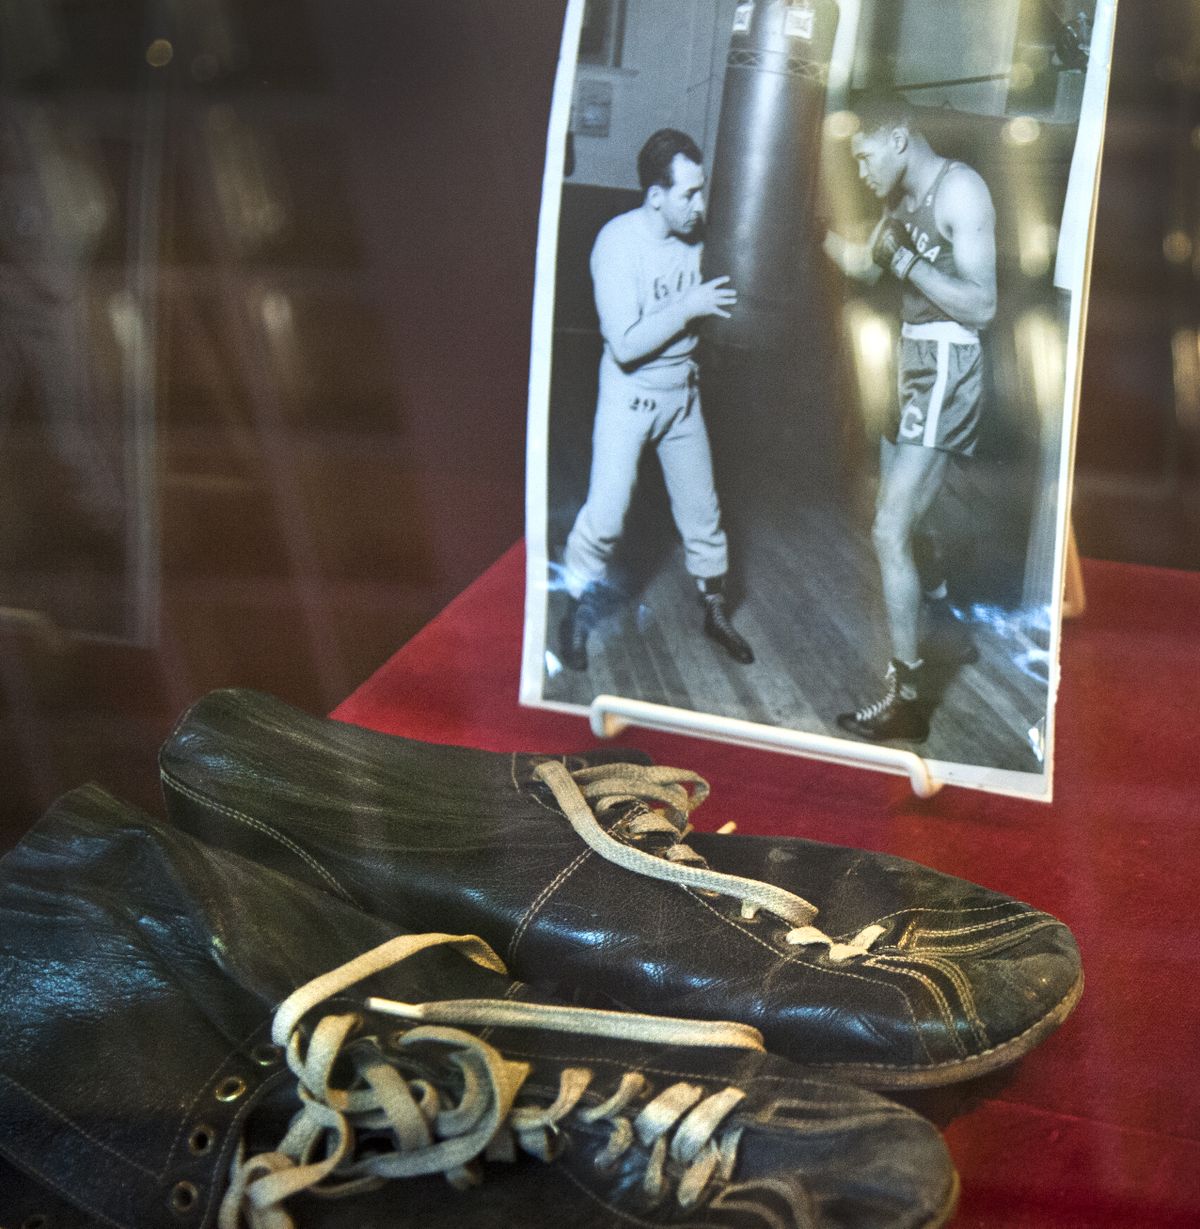 A 1949 photo of Gonzaga boxing great Carl Maxey and his coach, Joey August, is on display with Maxey’s 1950 boxing shoes. Maxey, a law student, finished his college career 32-0 and went on to become a prominent attorney. (Dan Pelle)